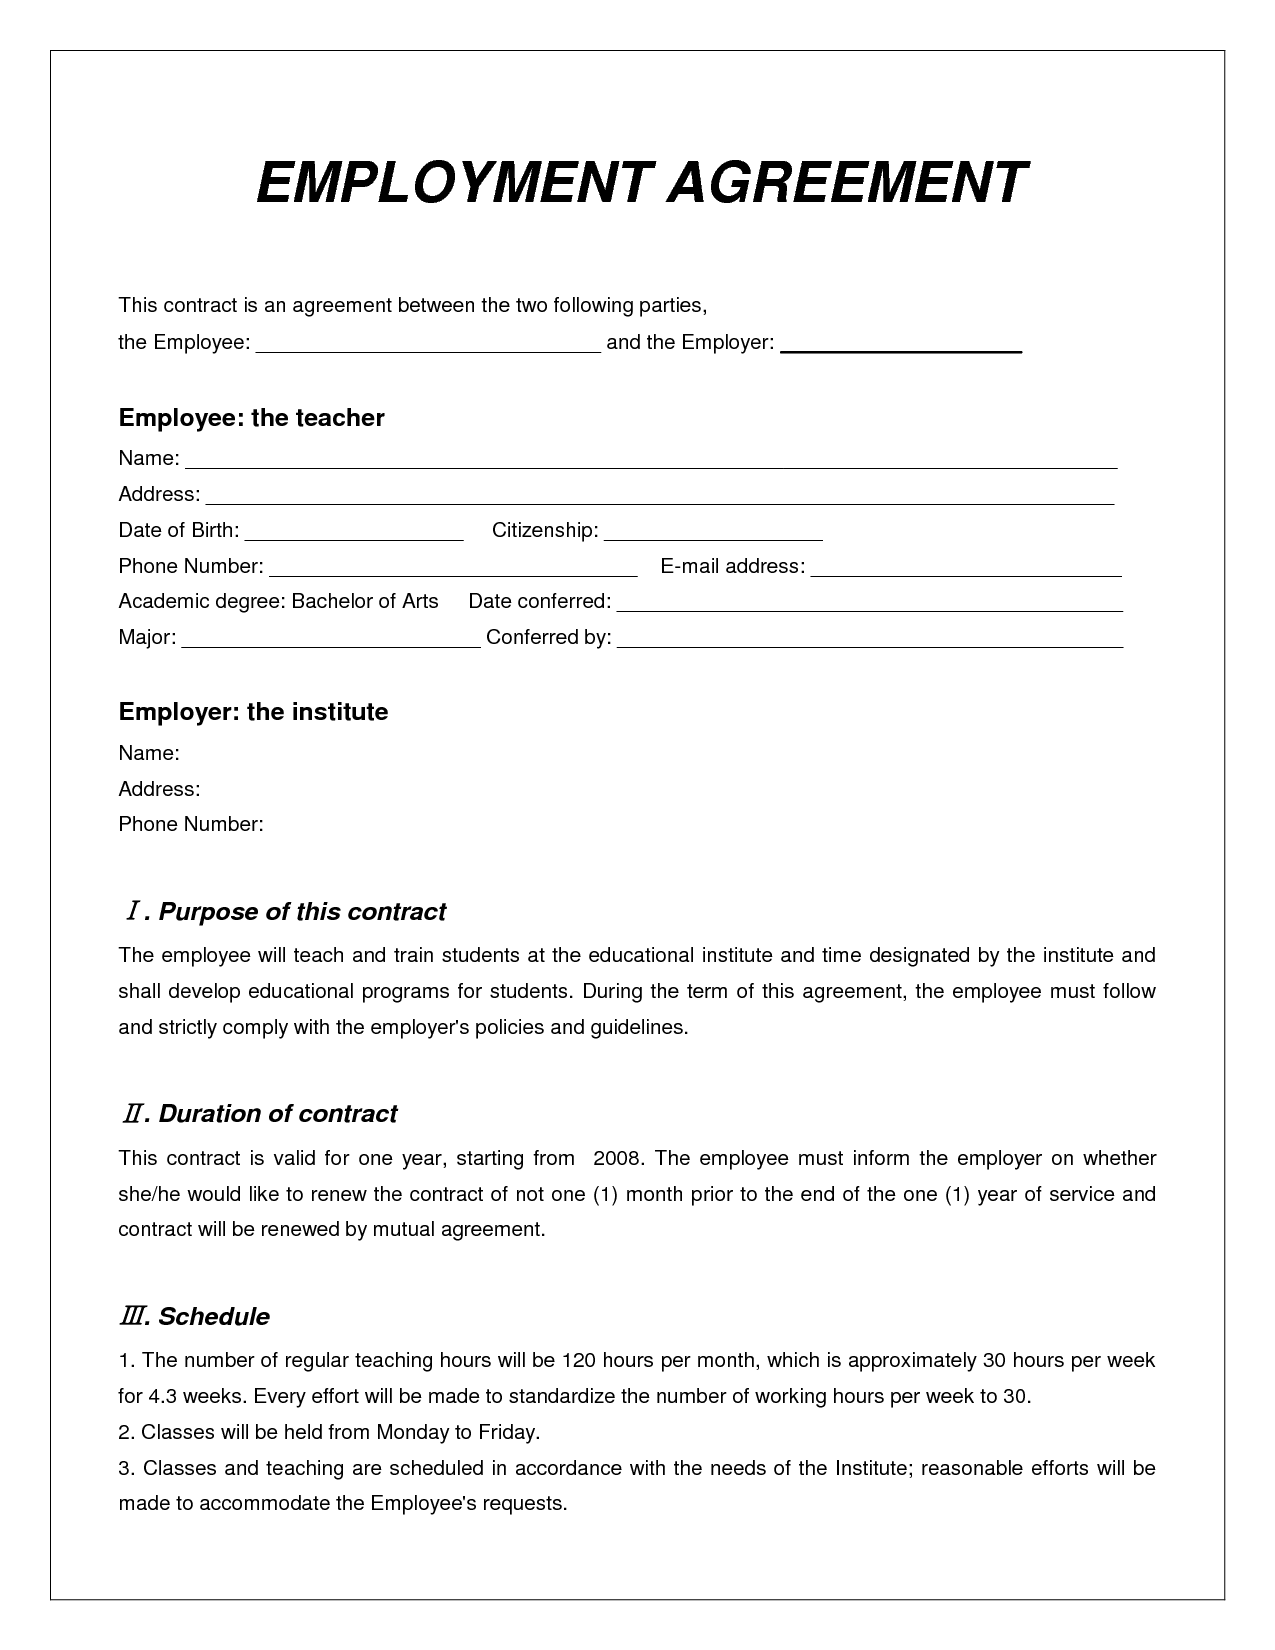 Best Photos of Employment Agreement Form Contract Employee 